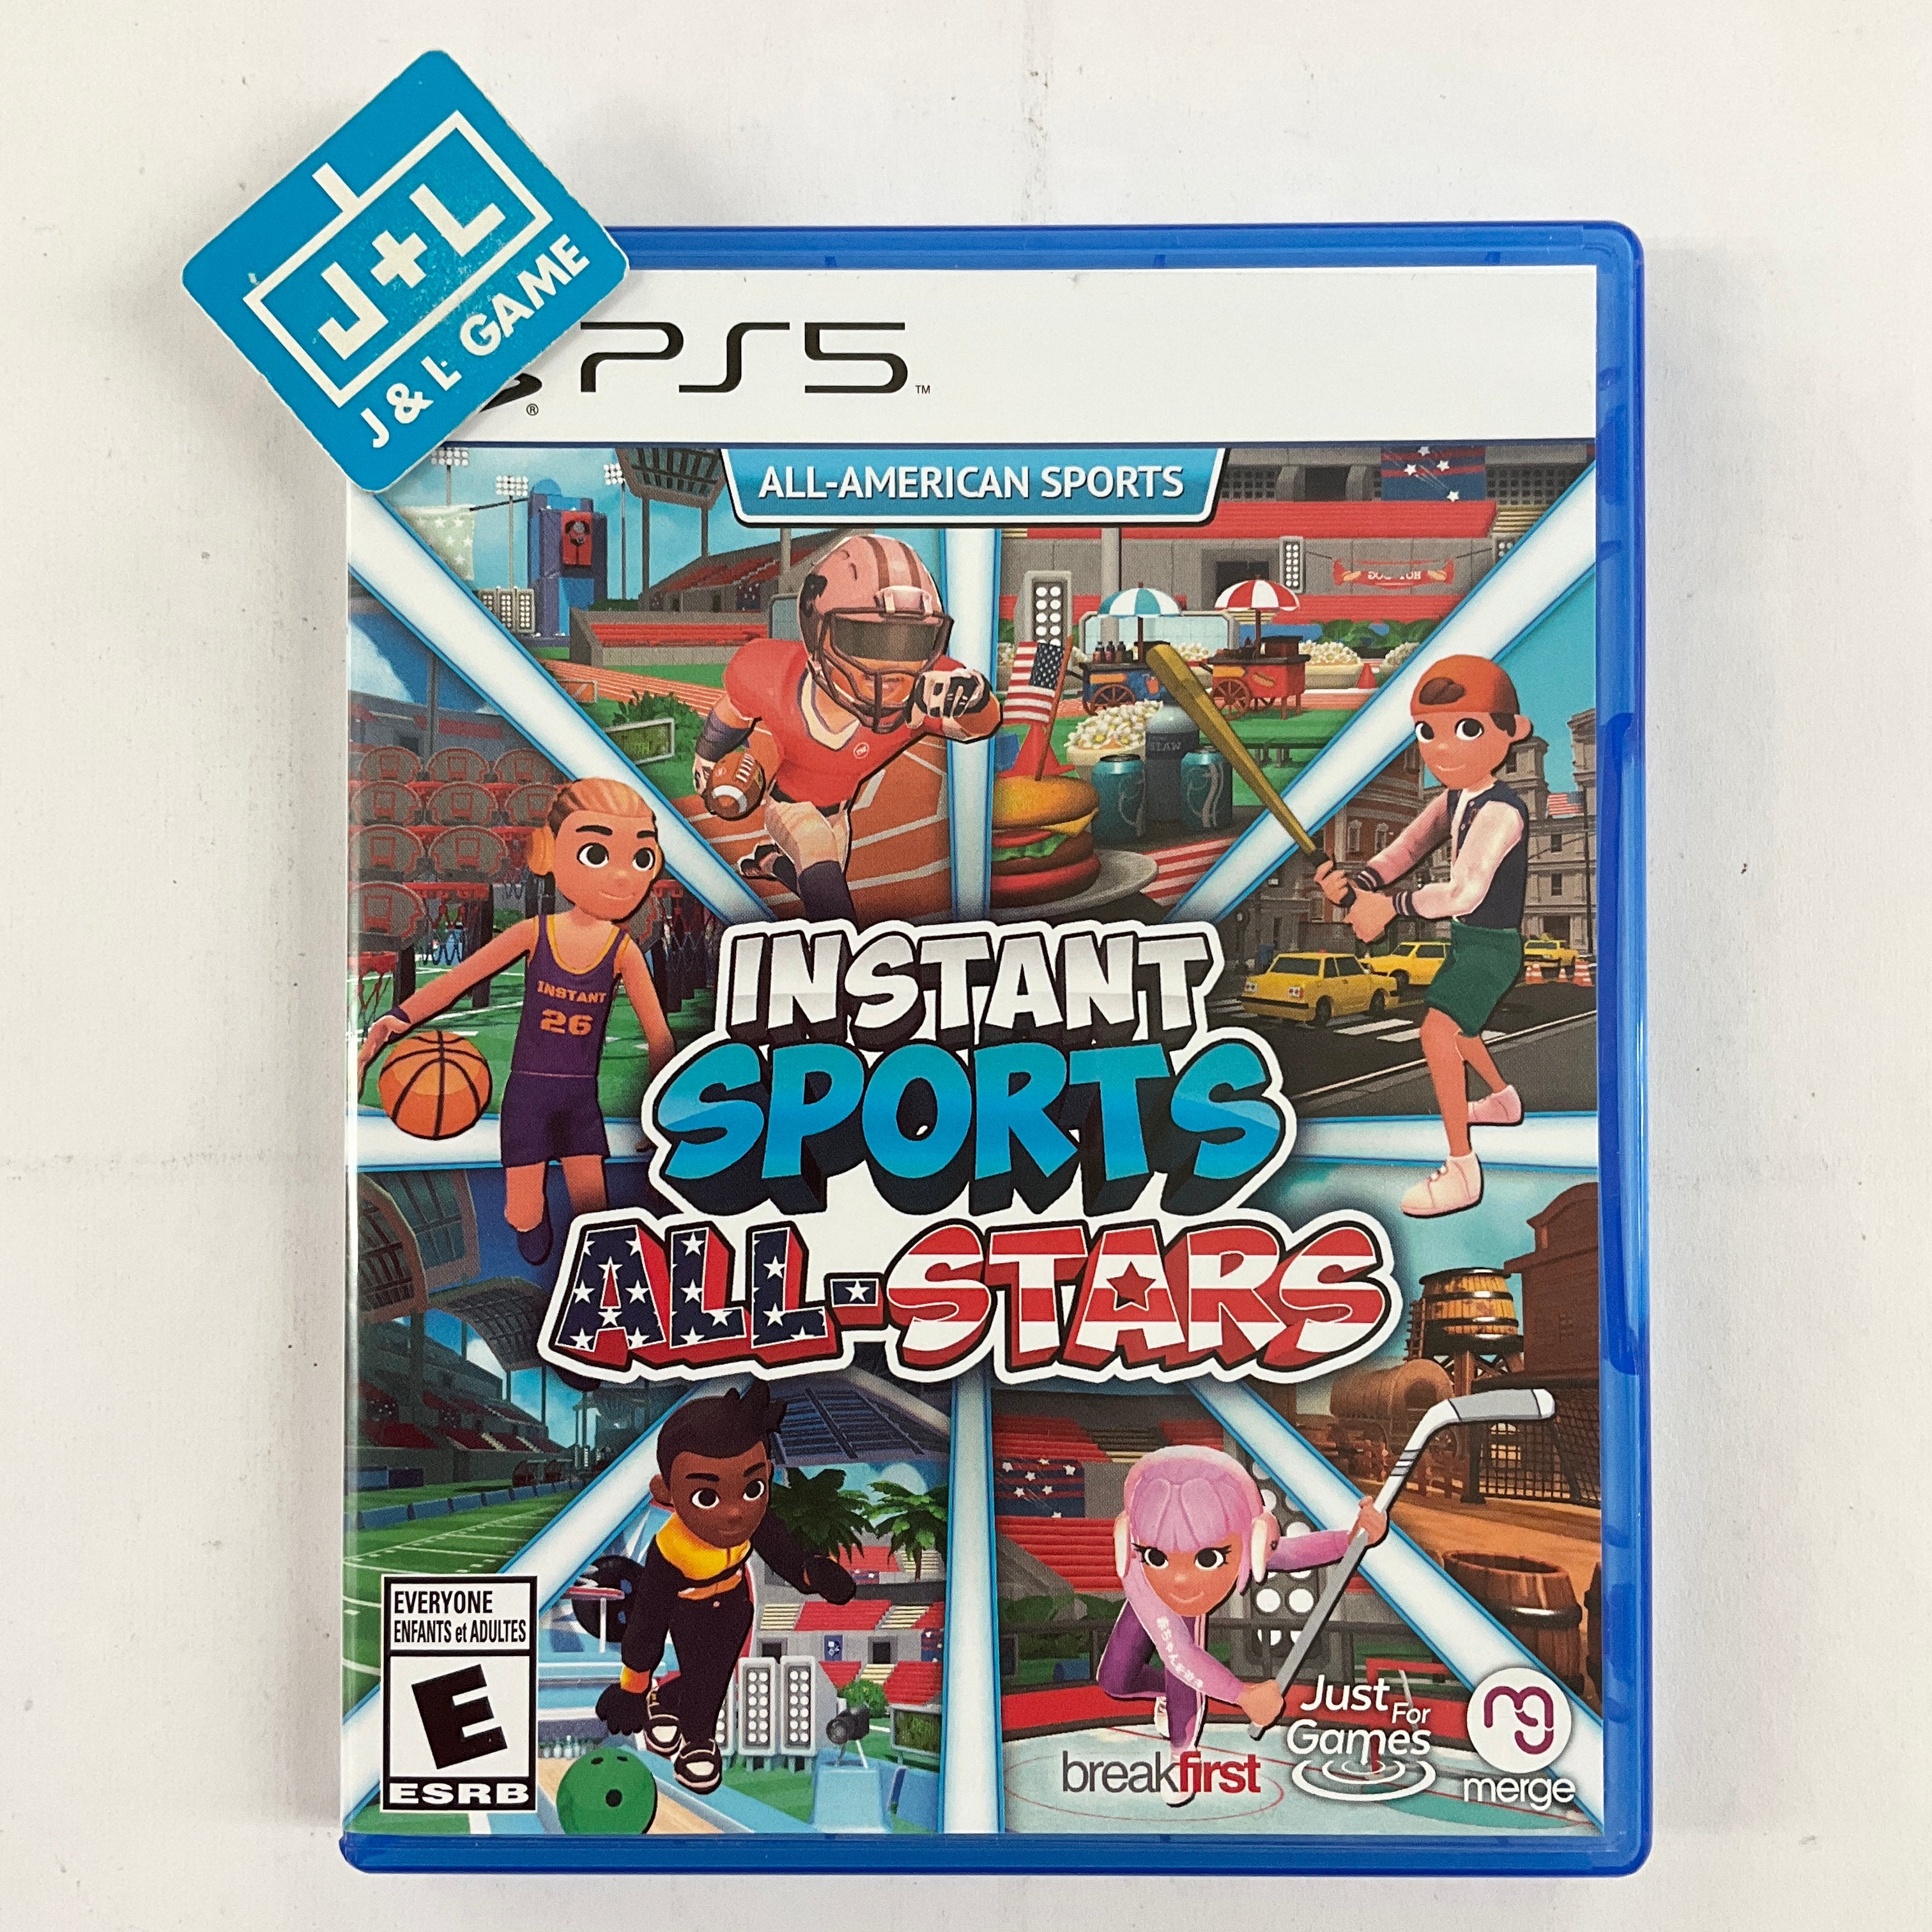 Instant Sports All-Stars - (PS5) PlayStation 5 [UNBOXING] Video Games Merge Games   